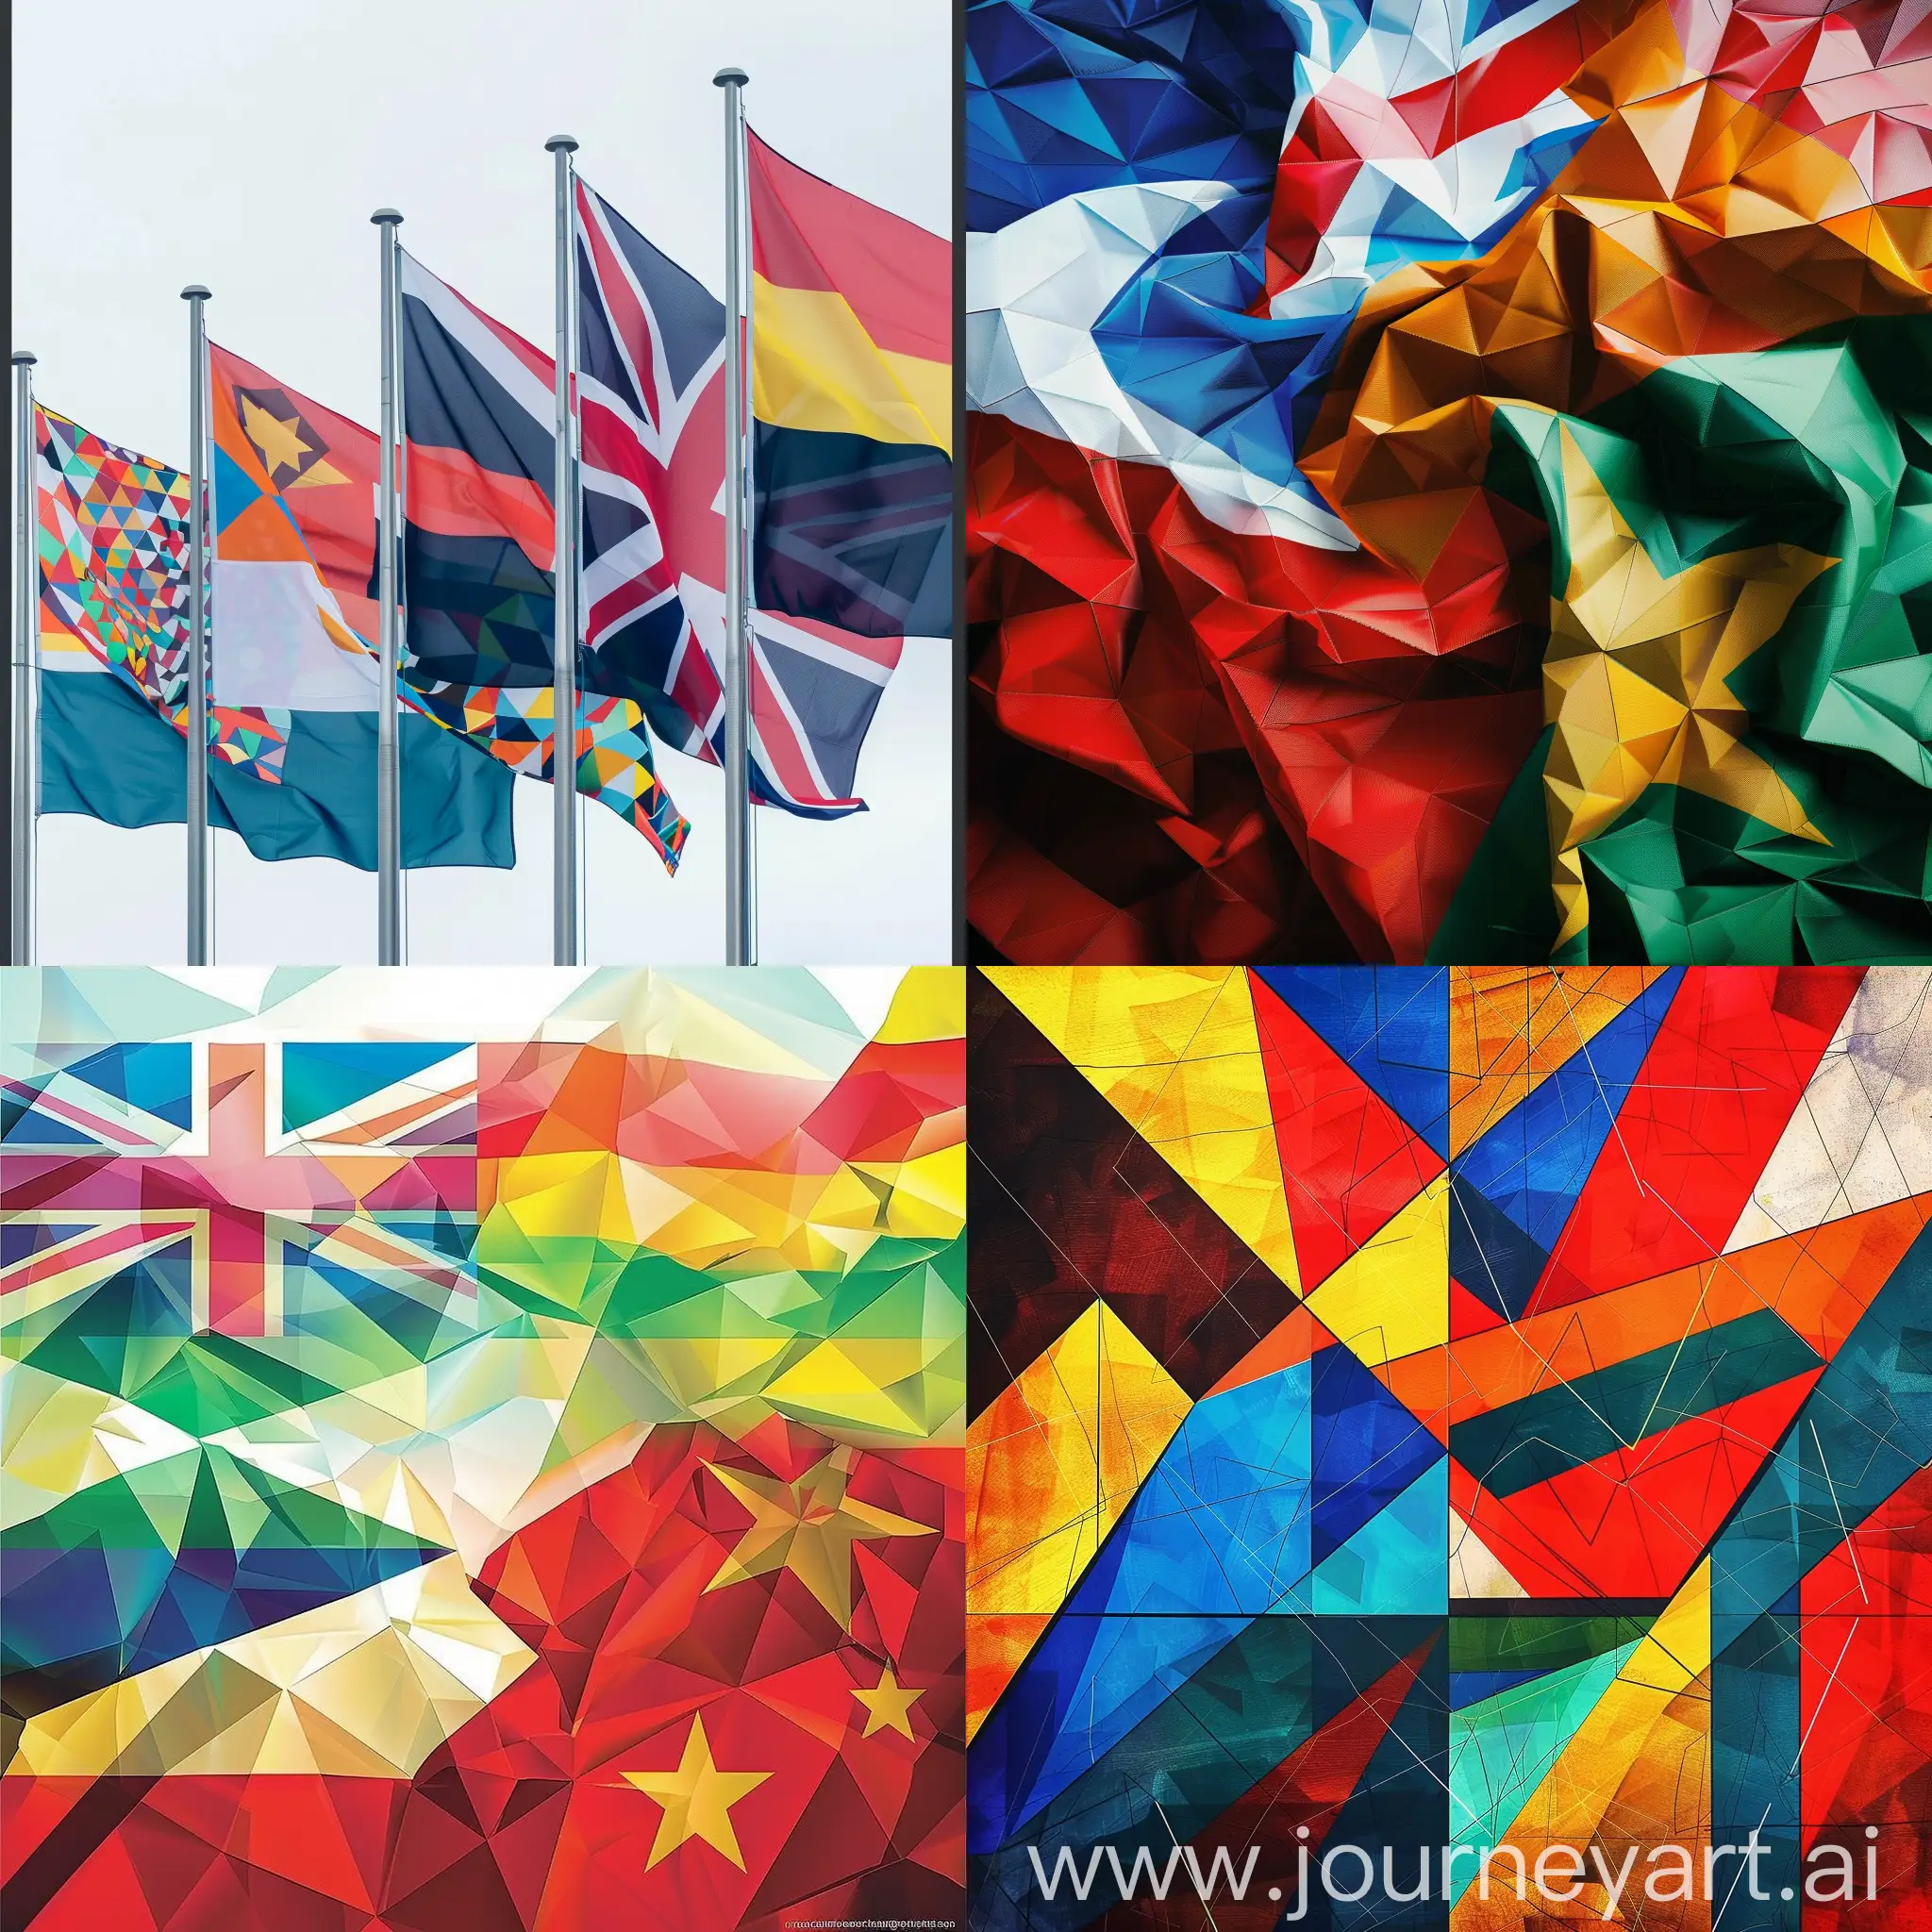 Geometric-Shapes-Representing-Countries-Flags